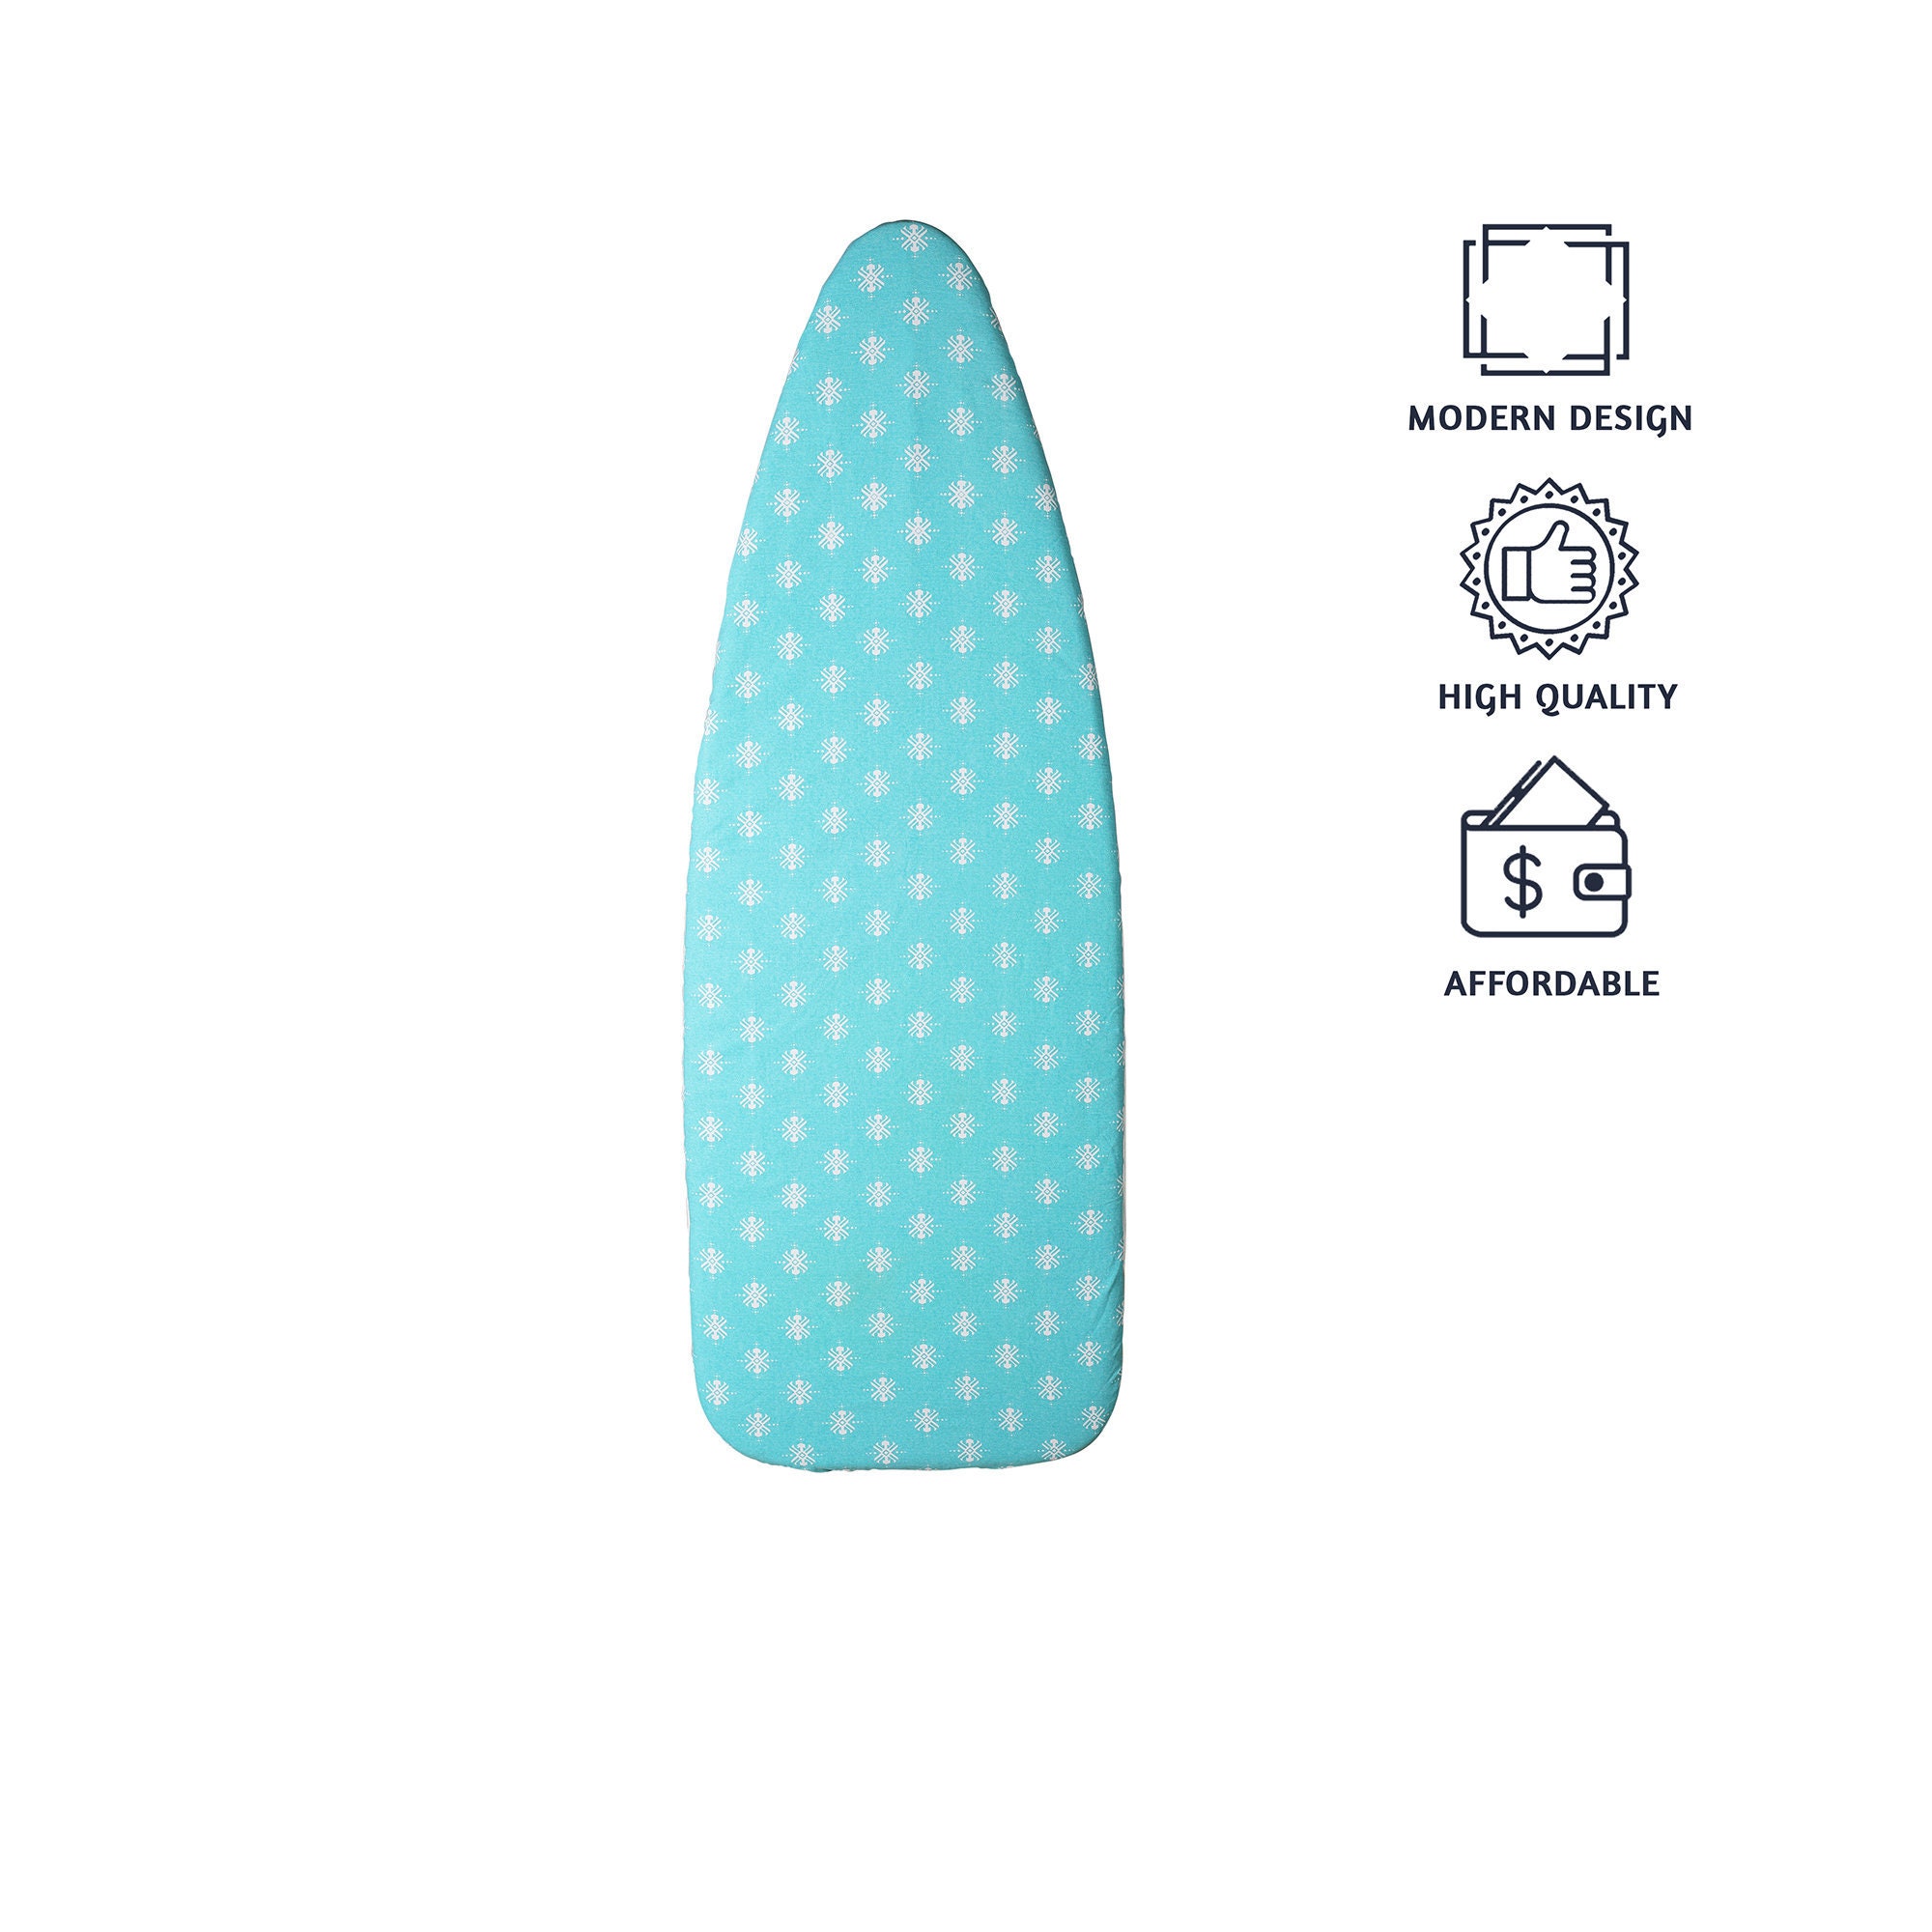 Combination Ironing Board Cover and 100 Percent WOOL IRONING PAD, Choose  From Any of the Fabrics in My Shop 